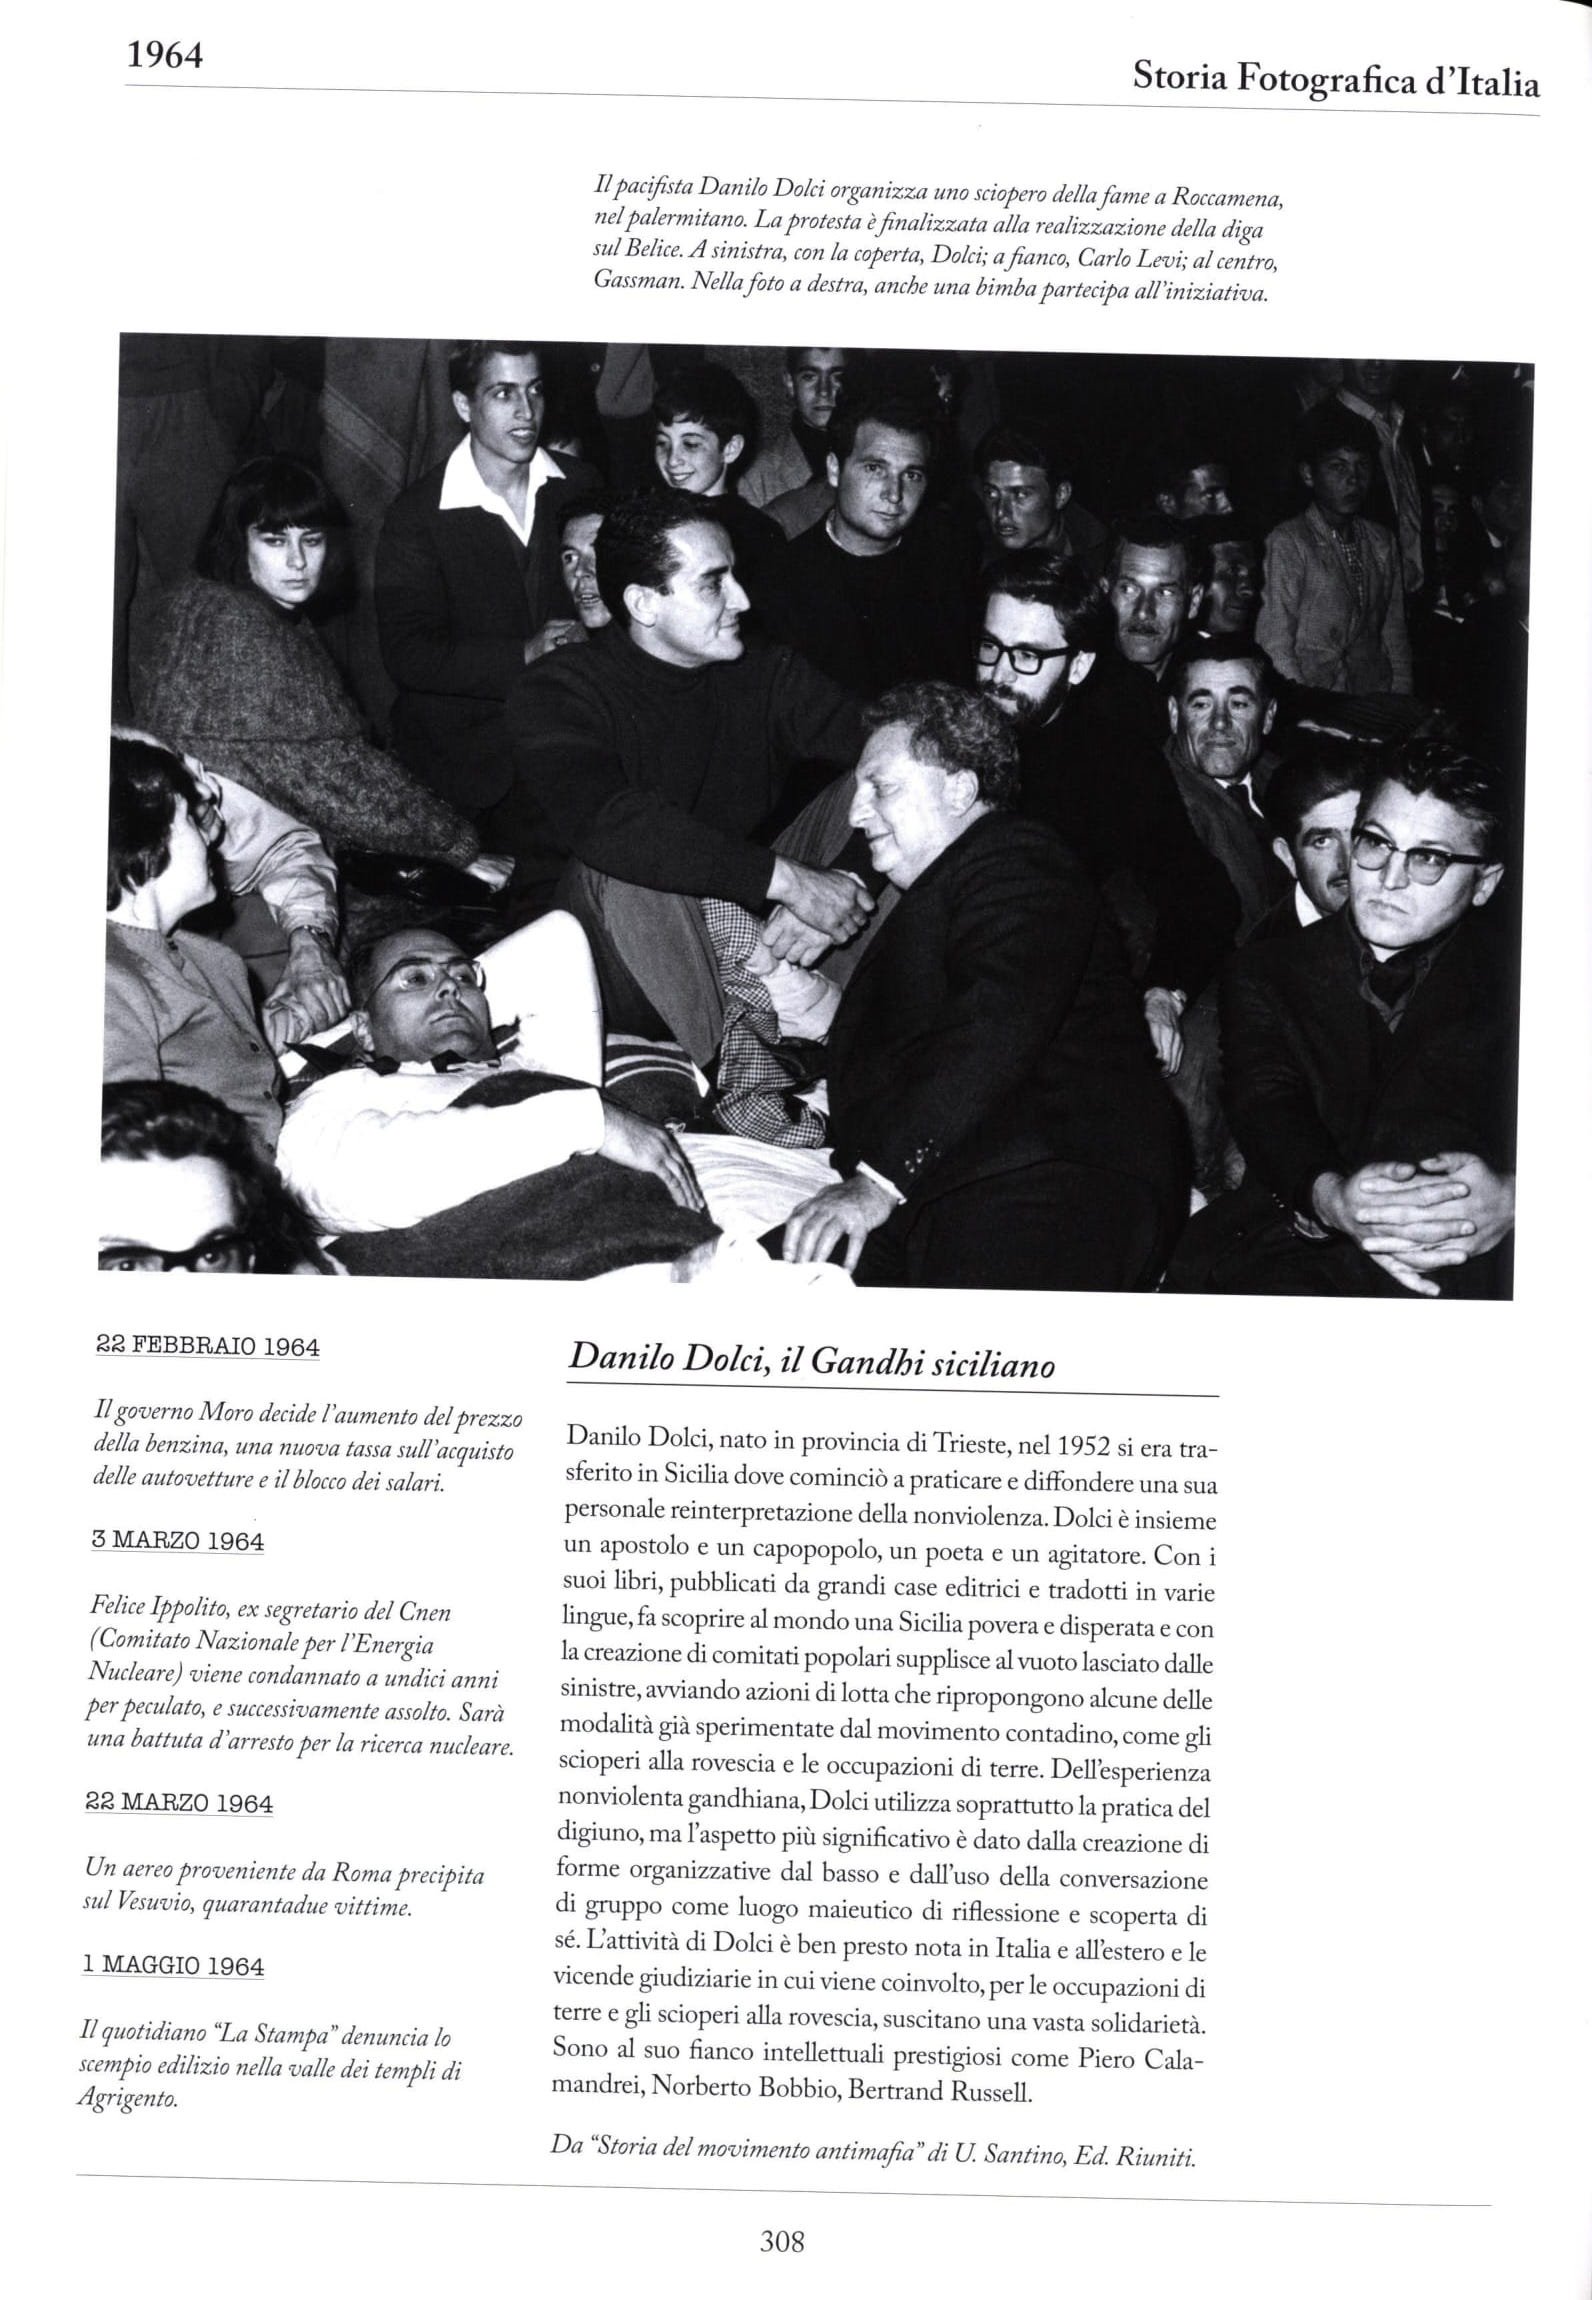 A scan of a magazine article that contains an image of Danilo Dolci.